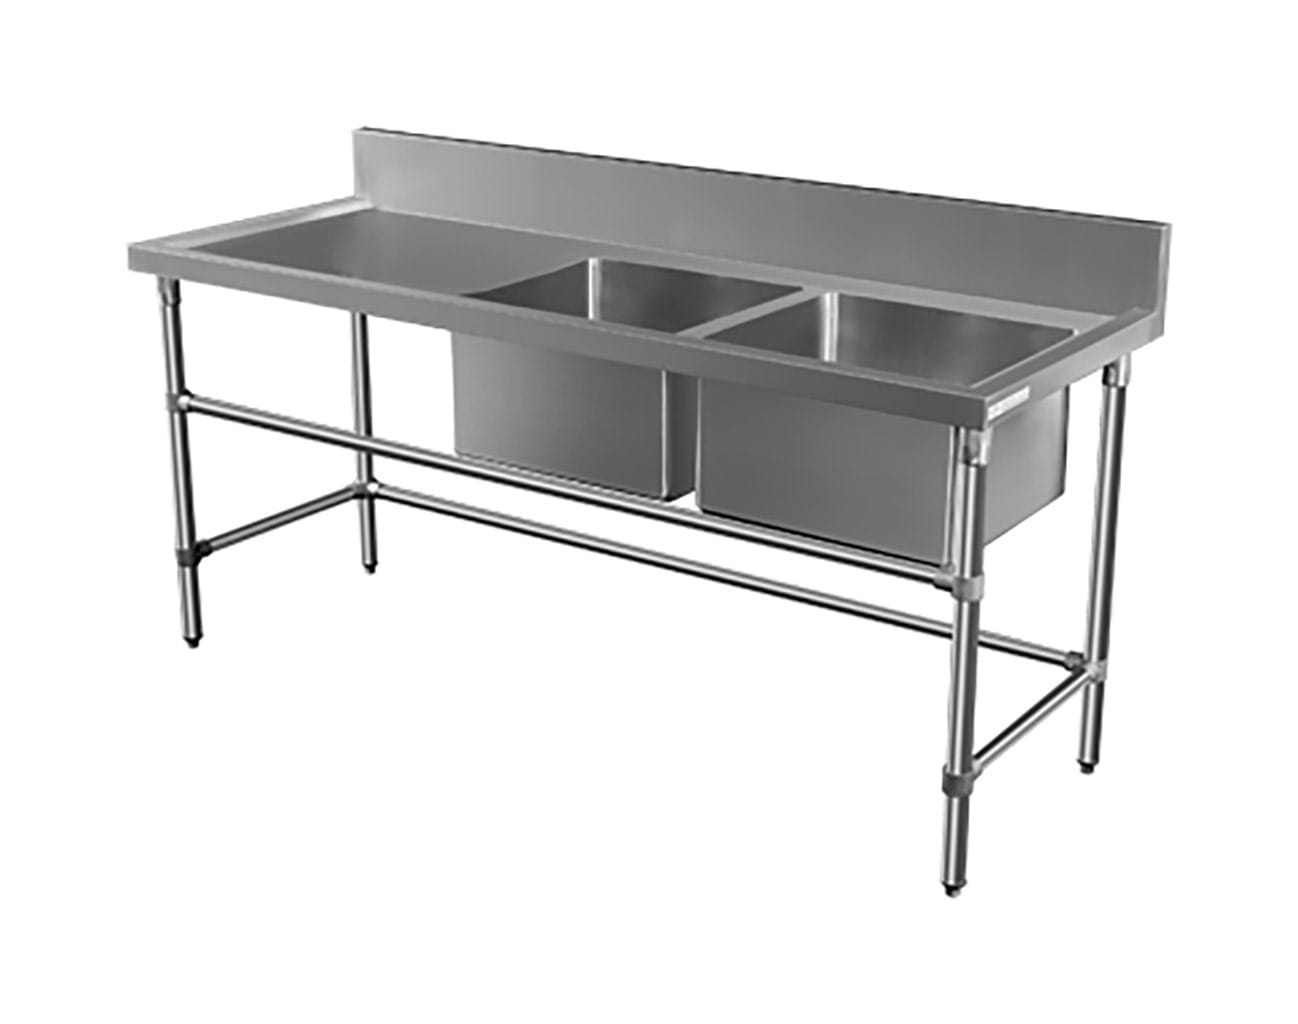 Double Bowl Stainless Restaurant Sink – Left Bench, 1900 x 700 x 900mm high